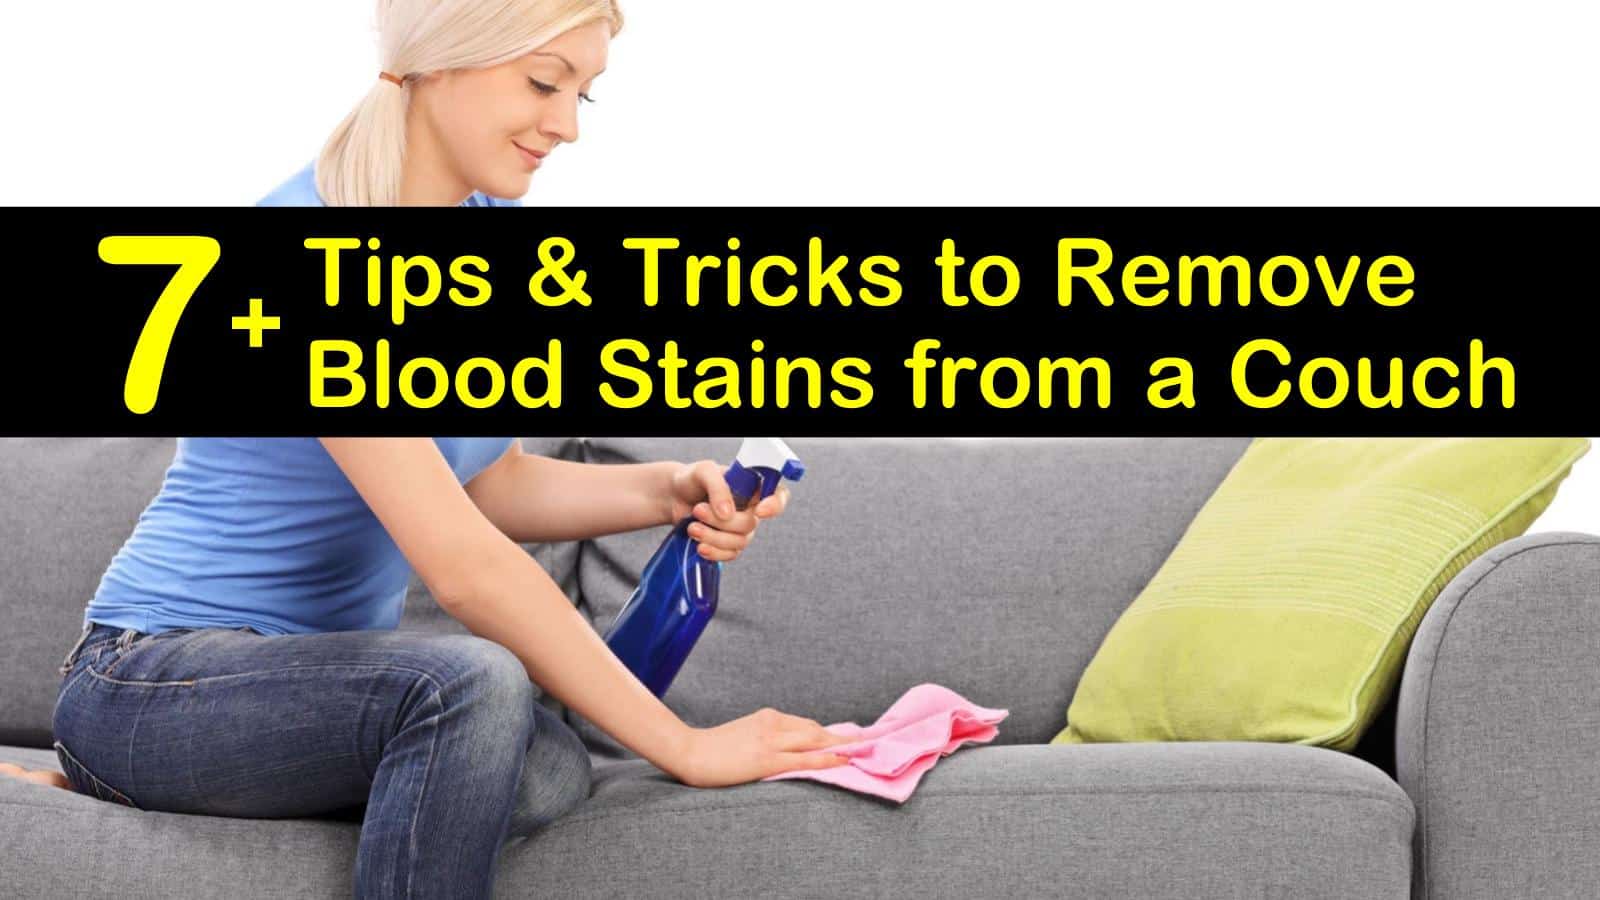 How to Remove Dried Blood Stains from a Couch: 15 Steps